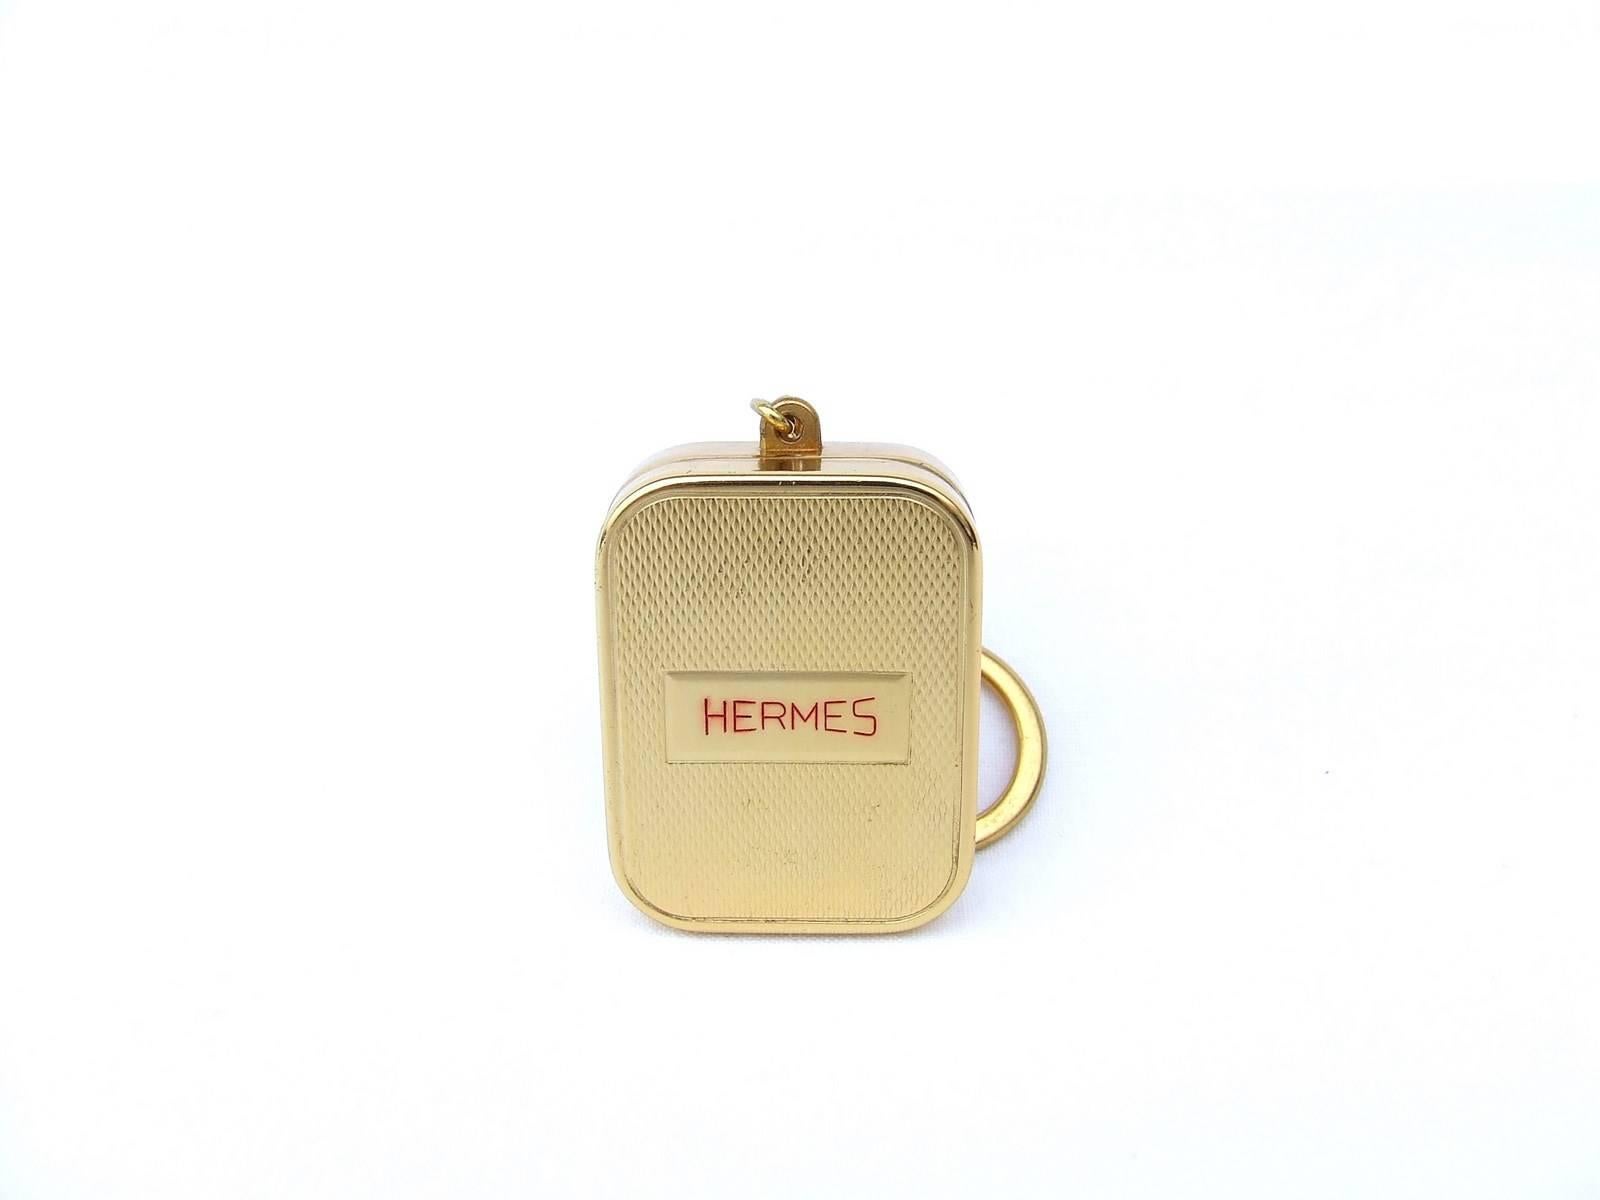 Beautiful and Rare Authentic Hermes Keychain

Also acts as a music box !

Wind-up the mecanic key (at the back) clockwise and go up the small button to hear Zorba the Greek

Made in Switzerland

Made of gilt metal

Measurements: 11,5 cm total Length